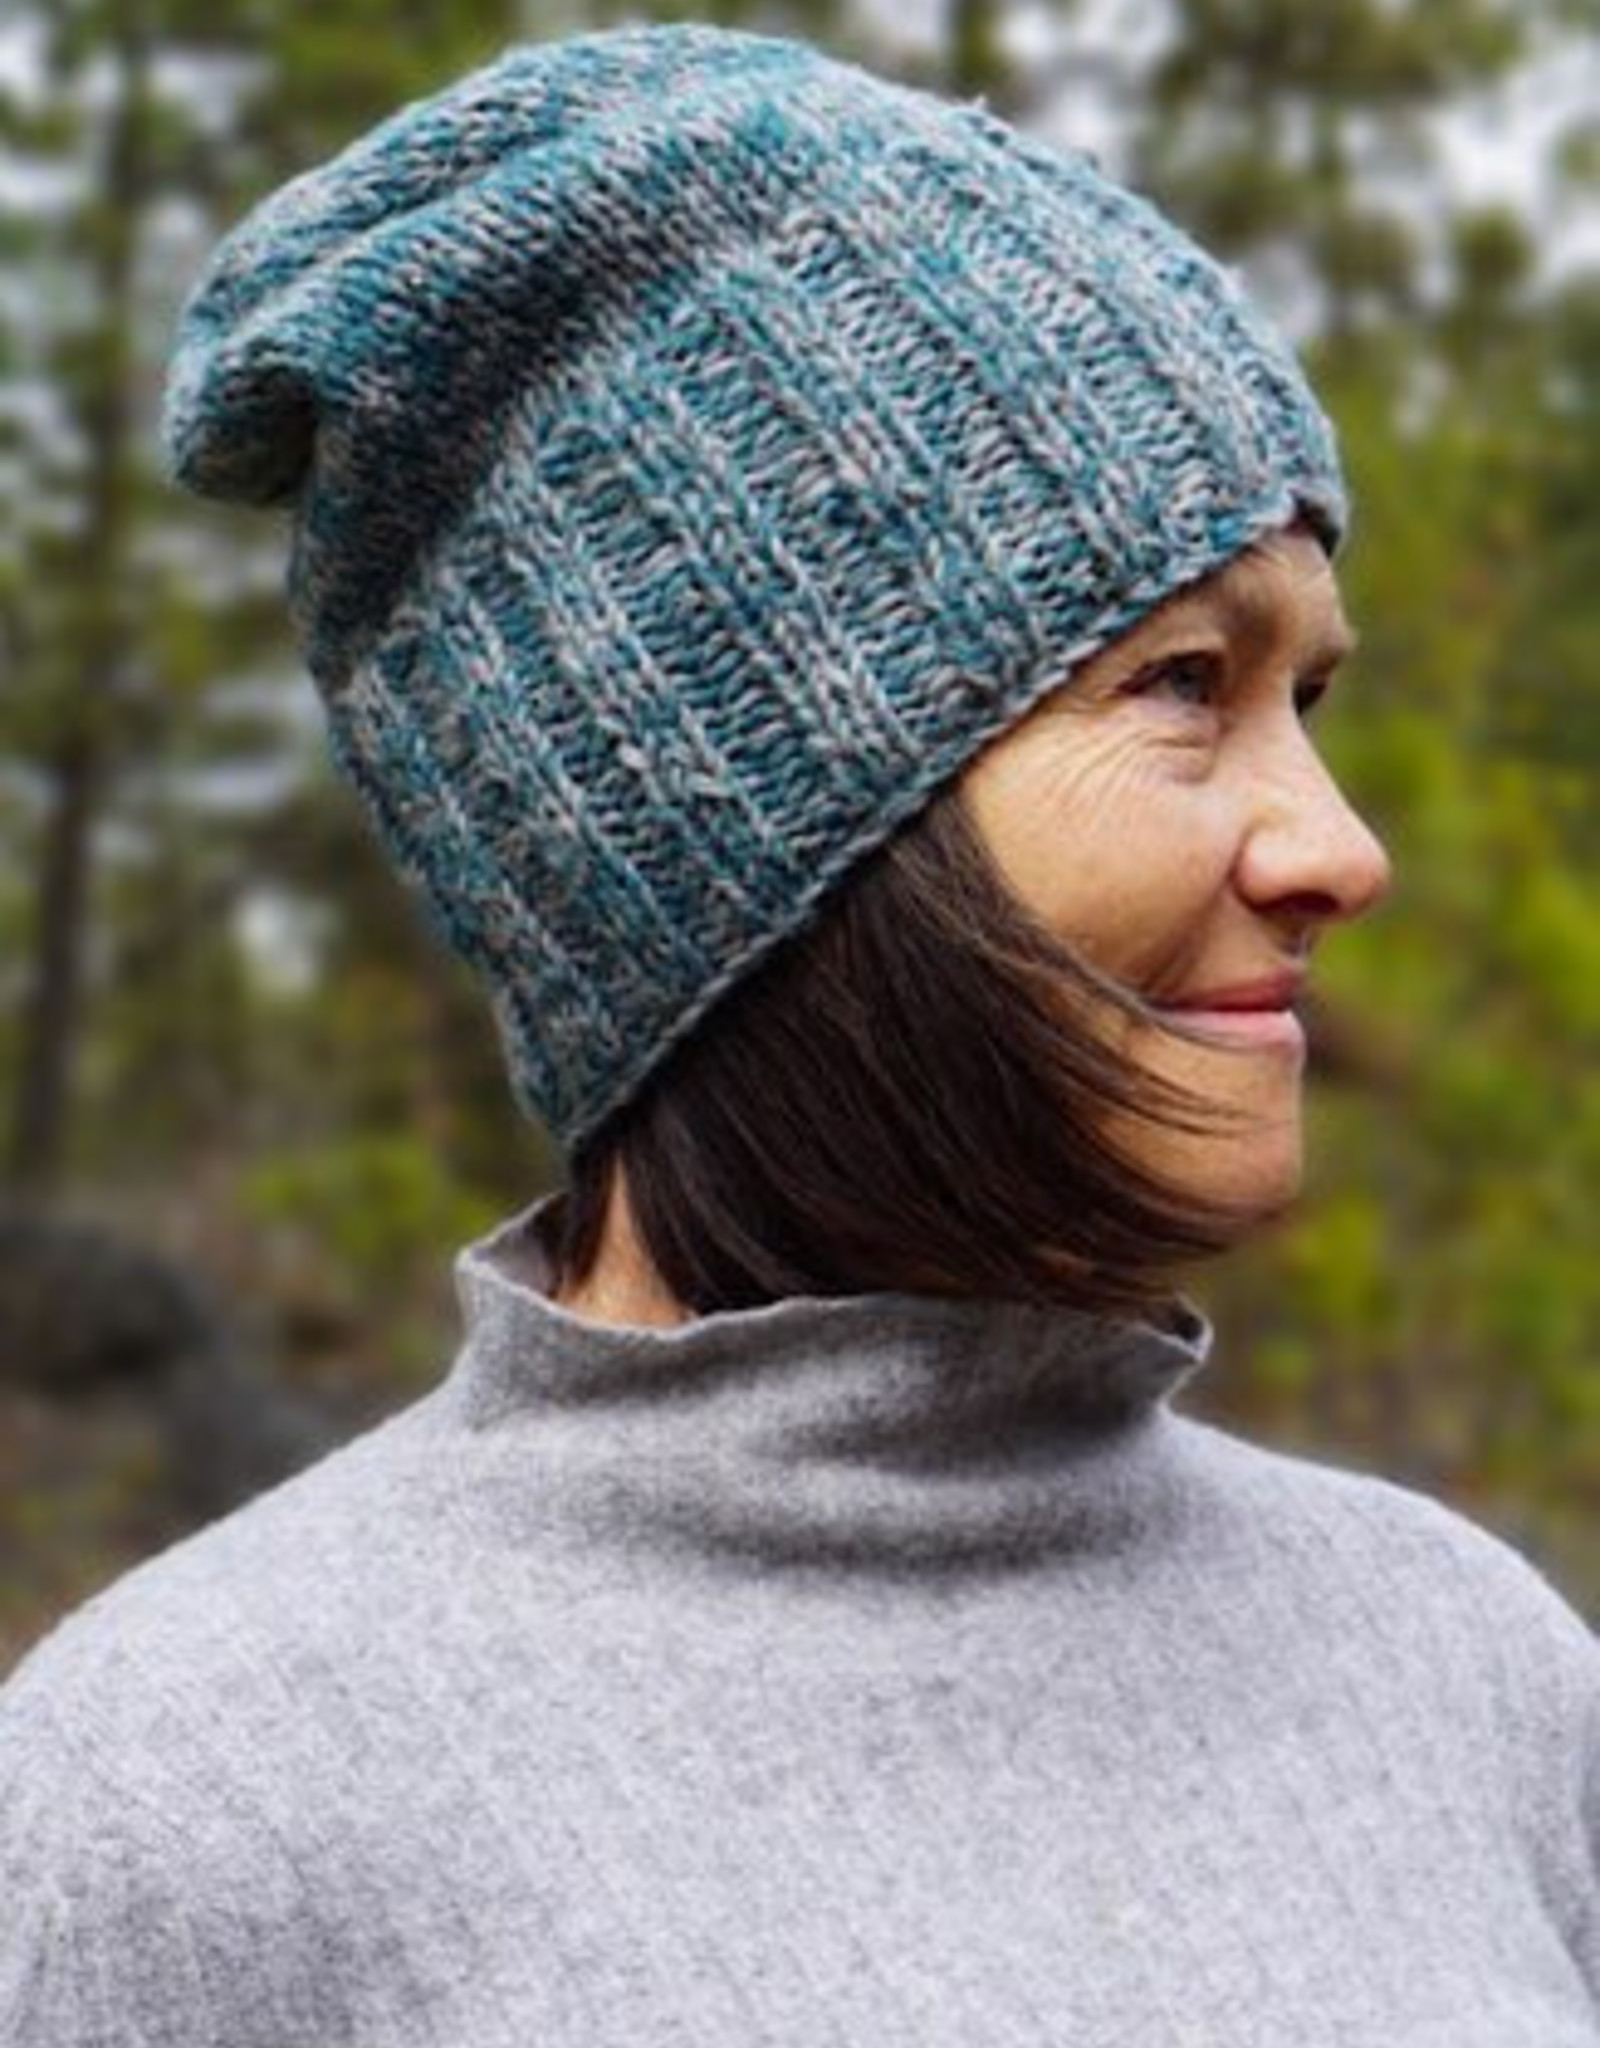 Ganesh Himal Slouched Hemp and Wool Lined Hat